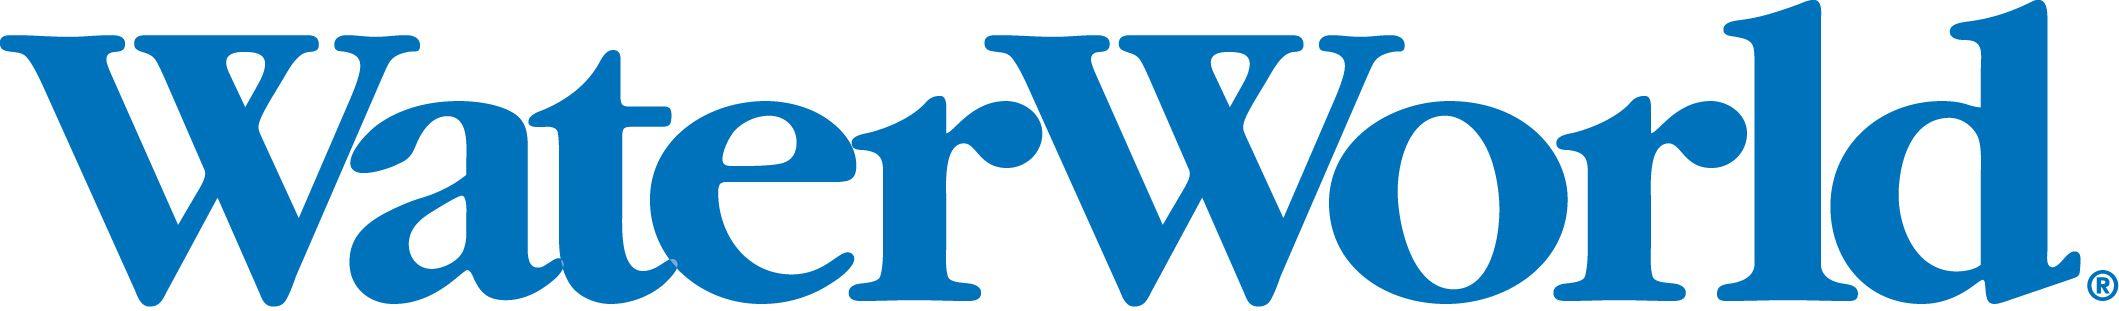 Waterworld Logo - WaterWorld - Utility Products Conference & Exposition